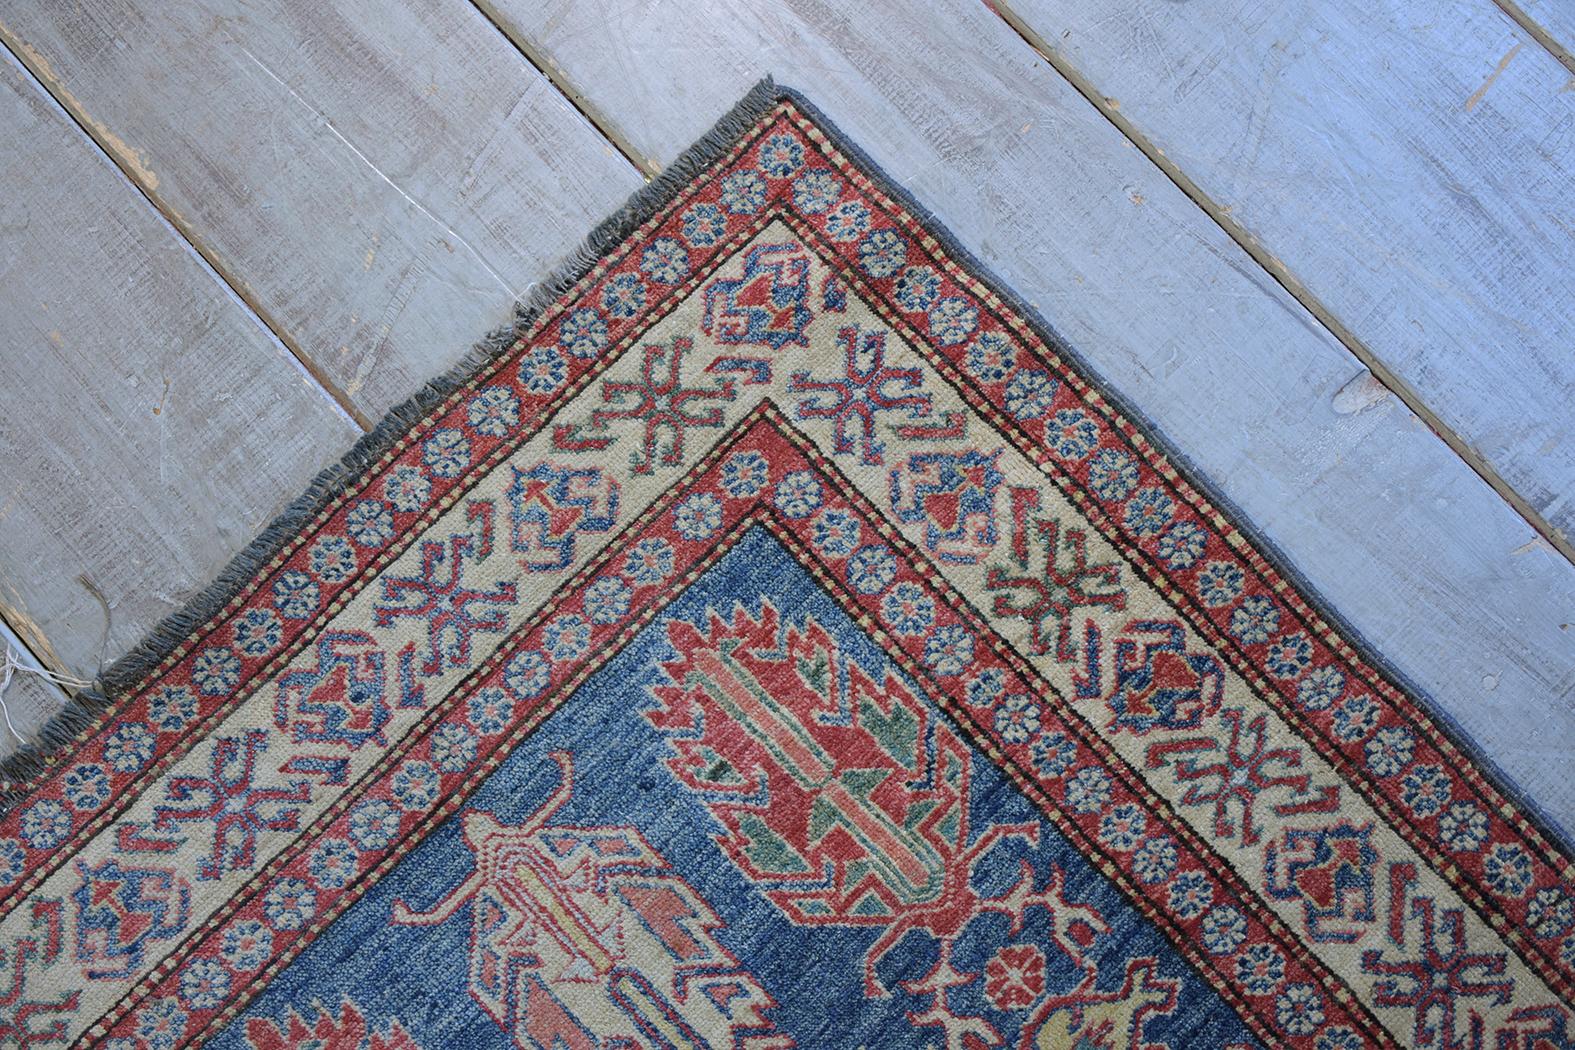 Vintage Semi-Antique Wool Carpet Rug In Good Condition For Sale In Los Angeles, CA